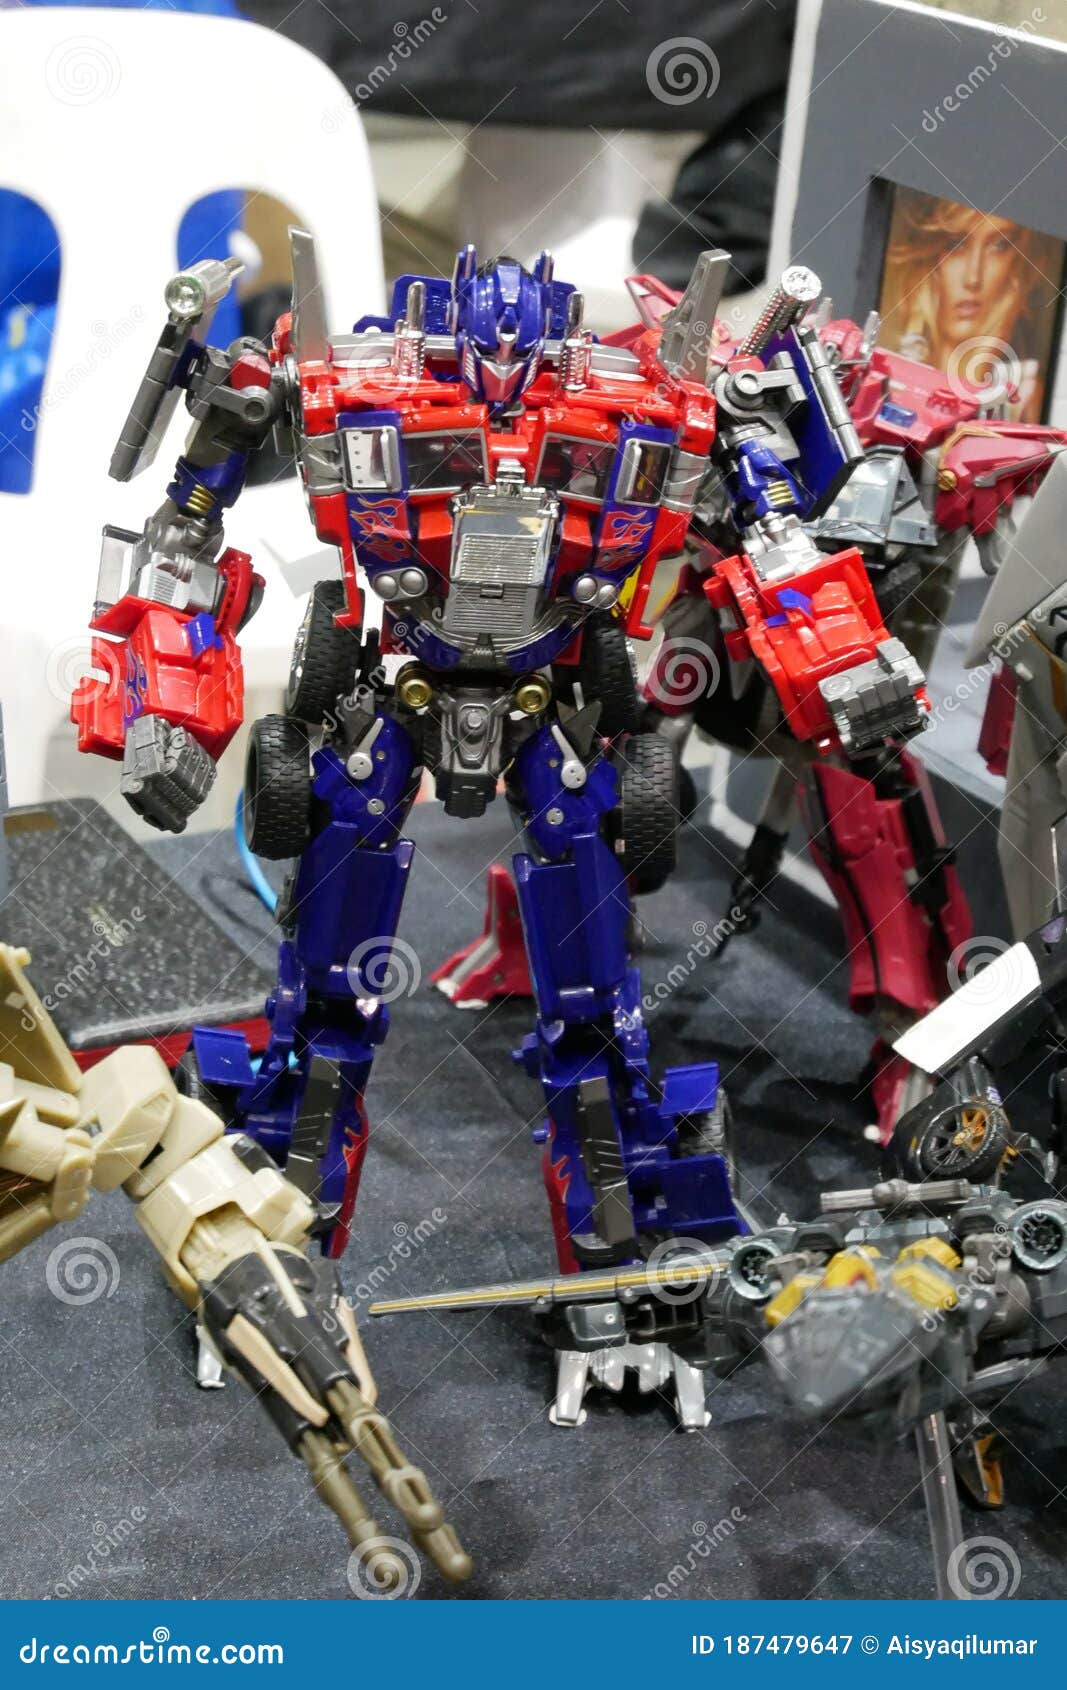 Fictional Character Transformers Toy Action Figure from Cartoon Developed  by Hasbro. Editorial Photography - Image of cybertron, decepticon: 187479647